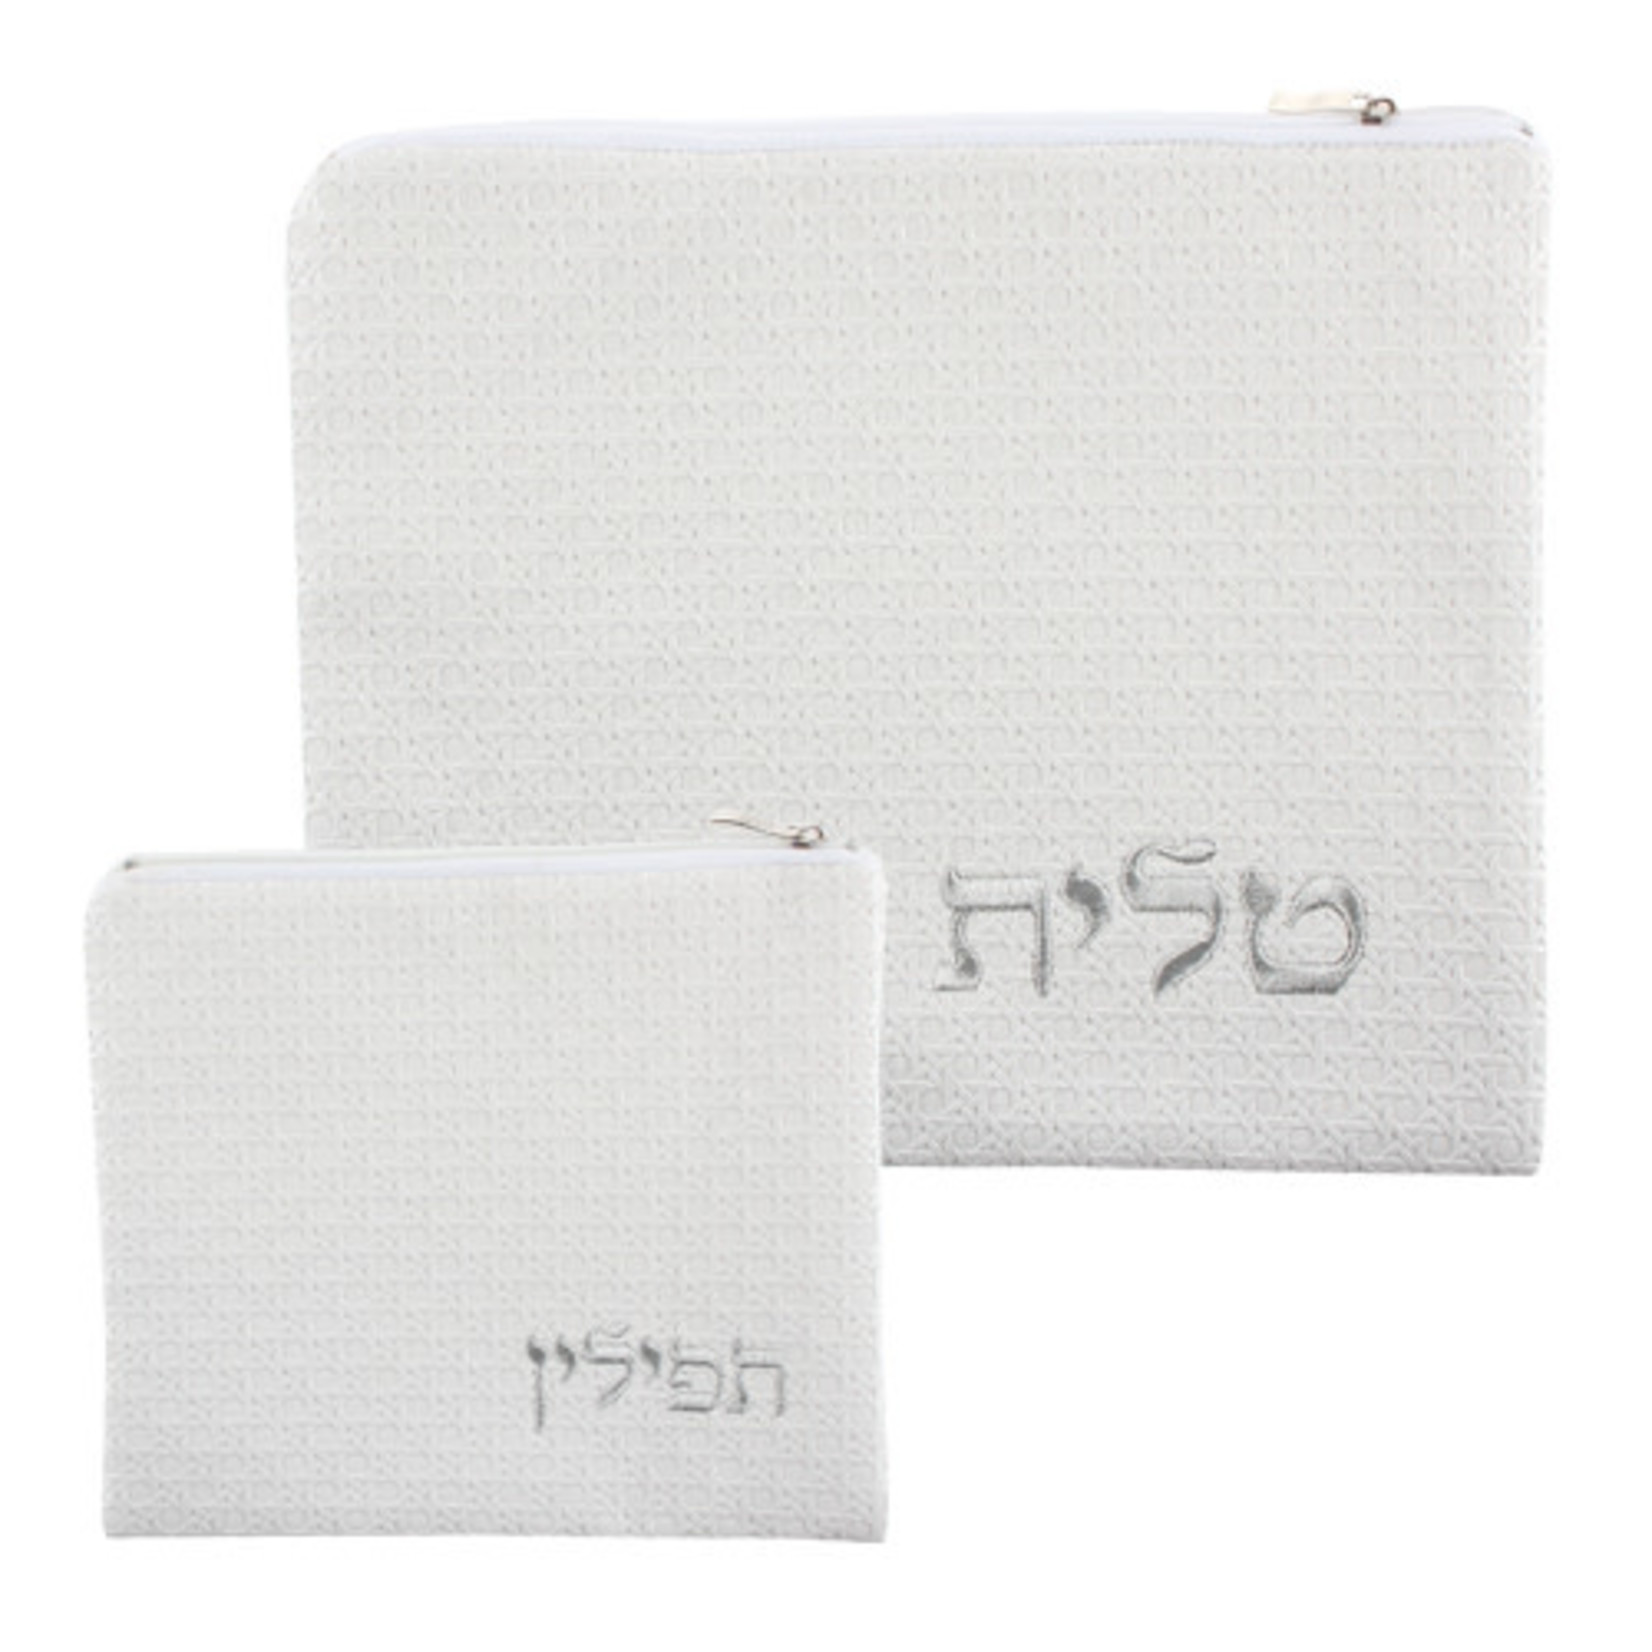 Leatherette Tallit and Tefillin Bag Set, White and Silver